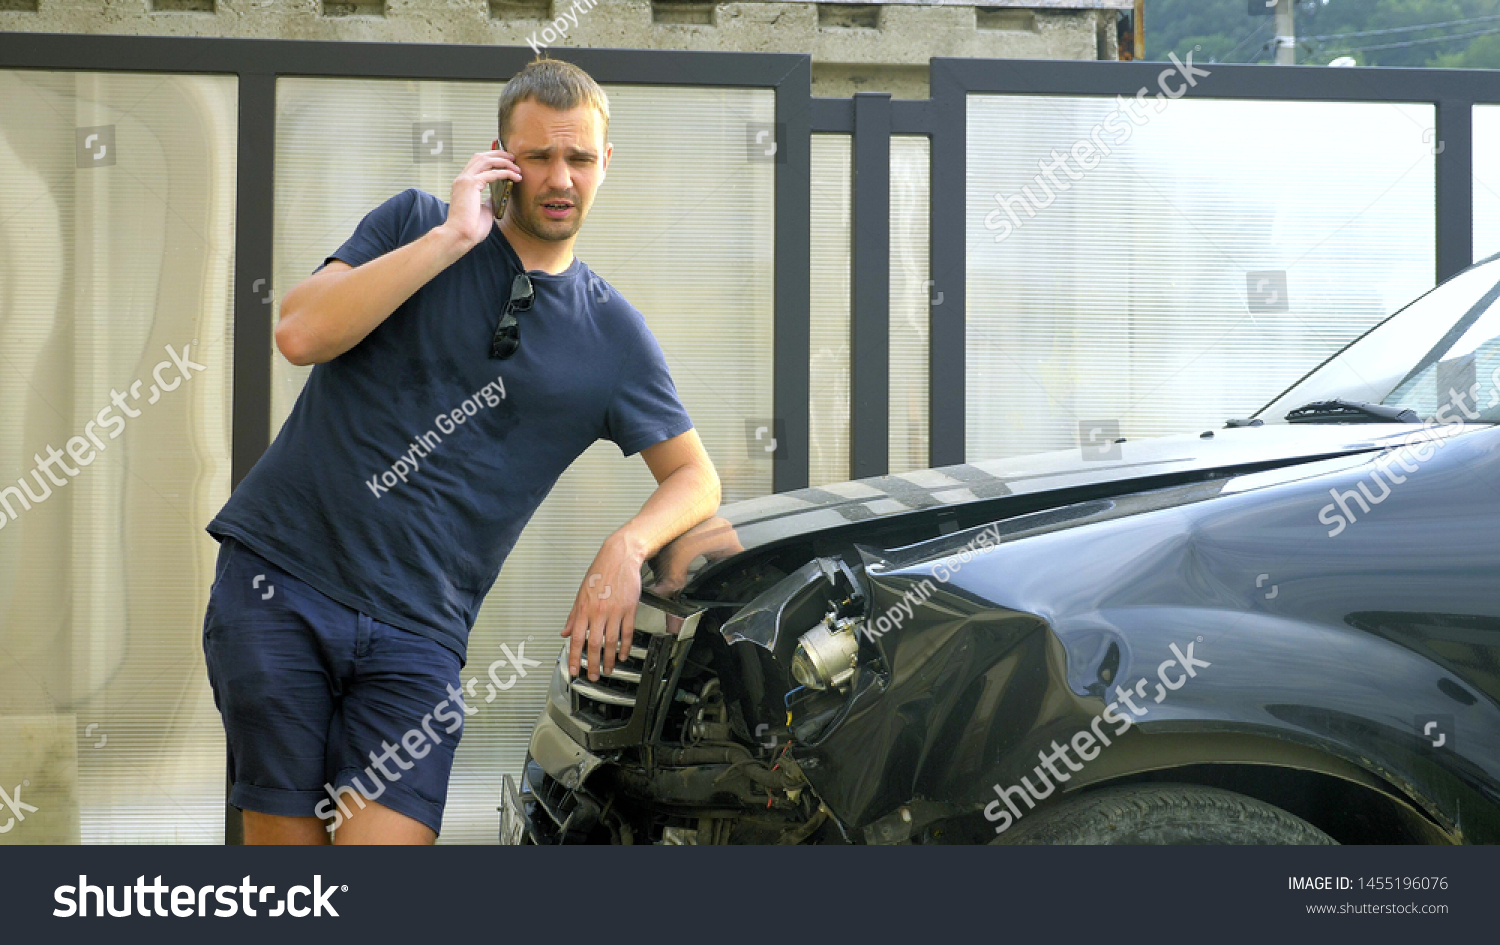 car accident concept. man in a state of shock talking on the phone after a car accident, standing by a car with a broken bumper #1455196076